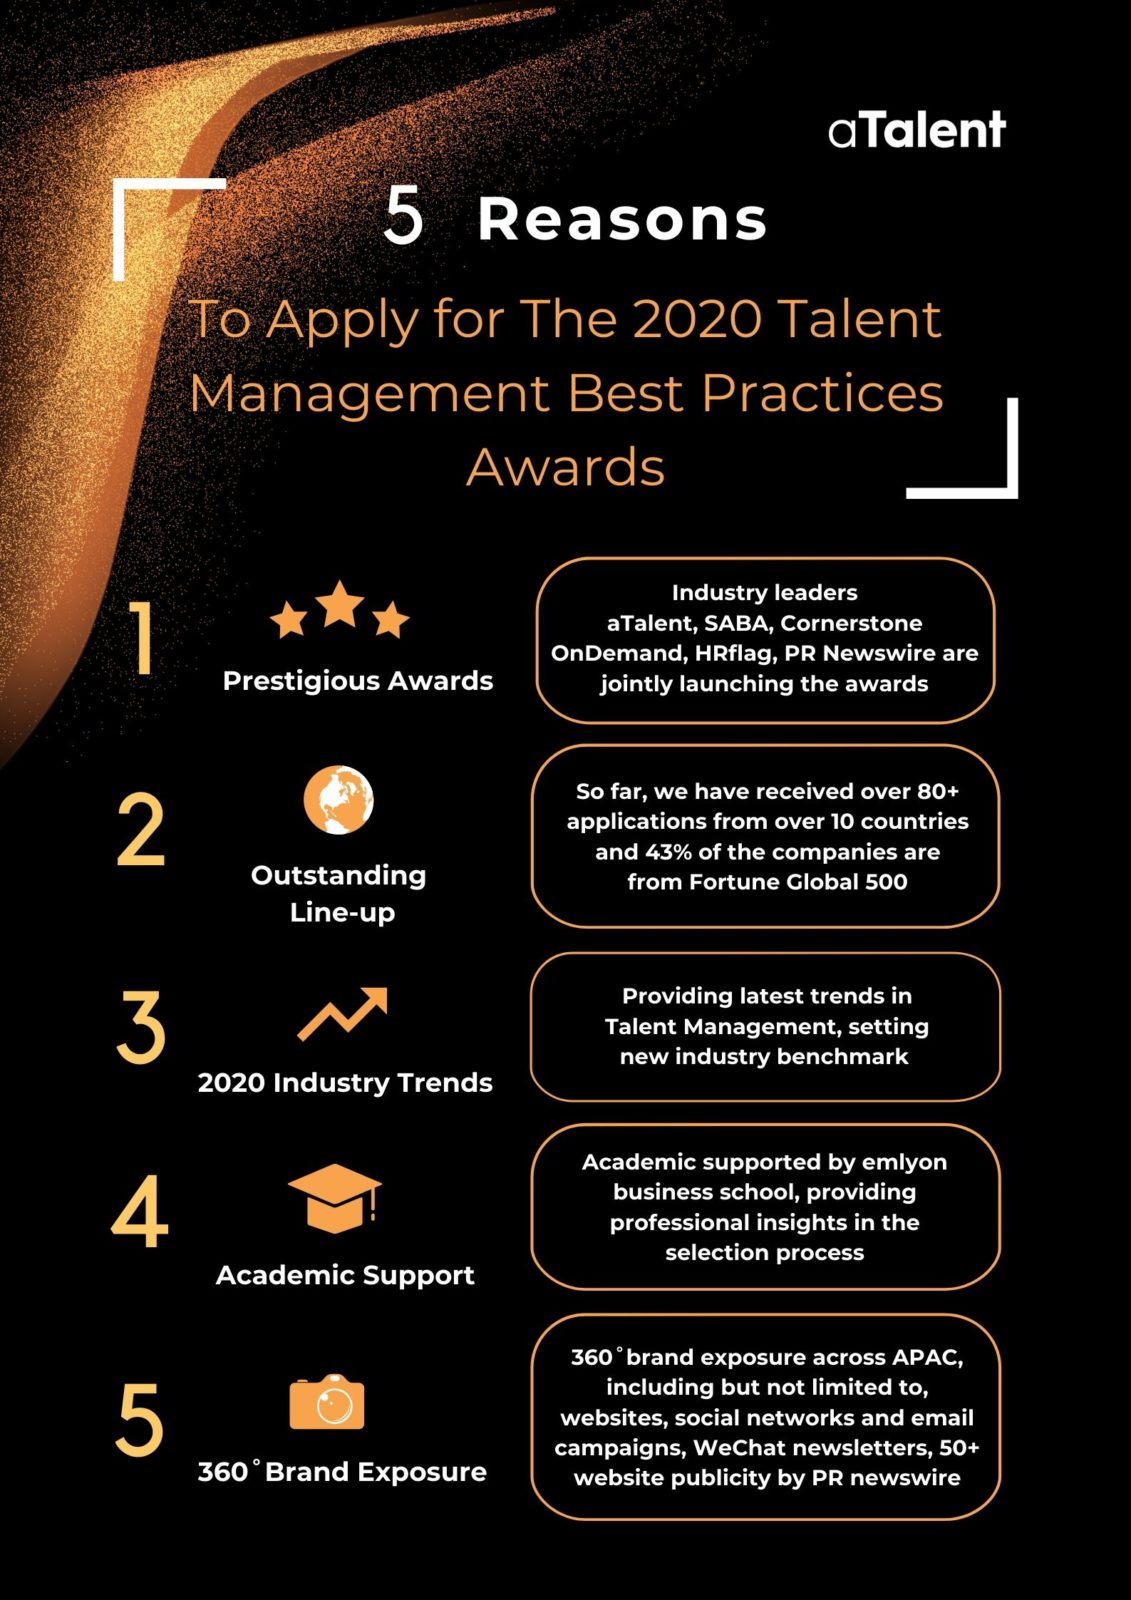 5 Reasons to Apply - Talent Management Awards 2